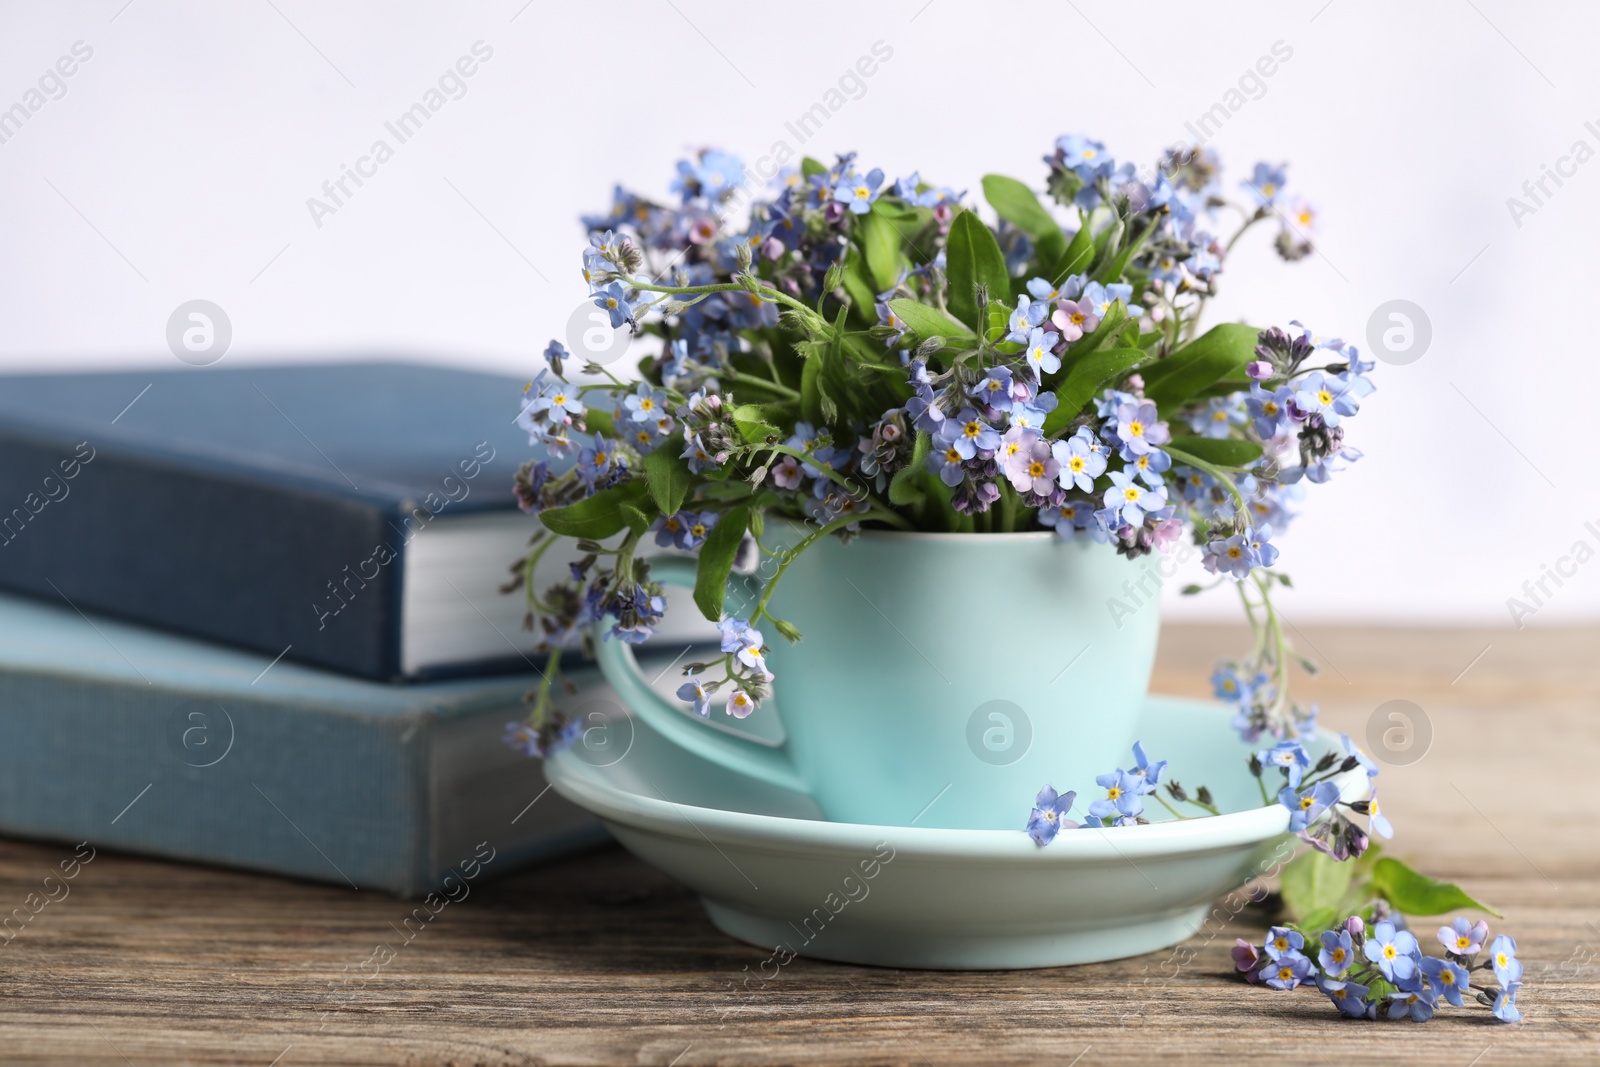 Photo of Beautiful forget-me-not flowers in cup, saucer and books on wooden table against light background, closeup